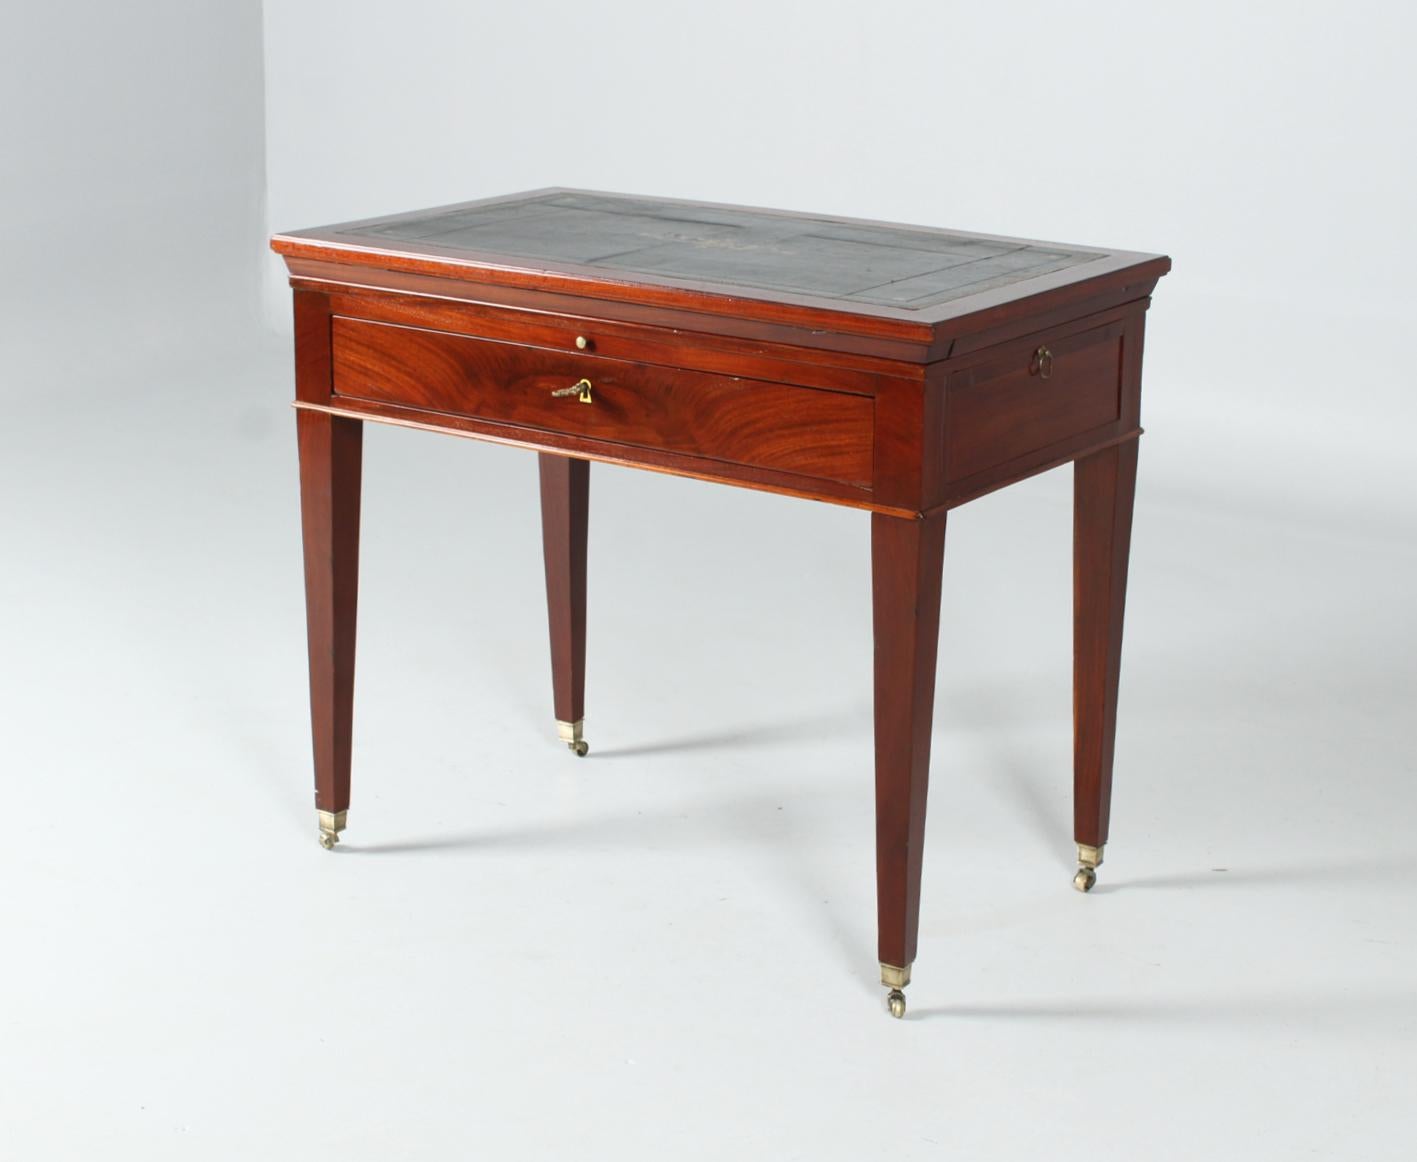 Antique architect table

France
mahogany, leather
Empire around 1810

Dimensions: H x W x D: 78 x 89 x 55 cm

Description:
Architect's or draftsman's table standing on pointed legs with brass casters. So-called 